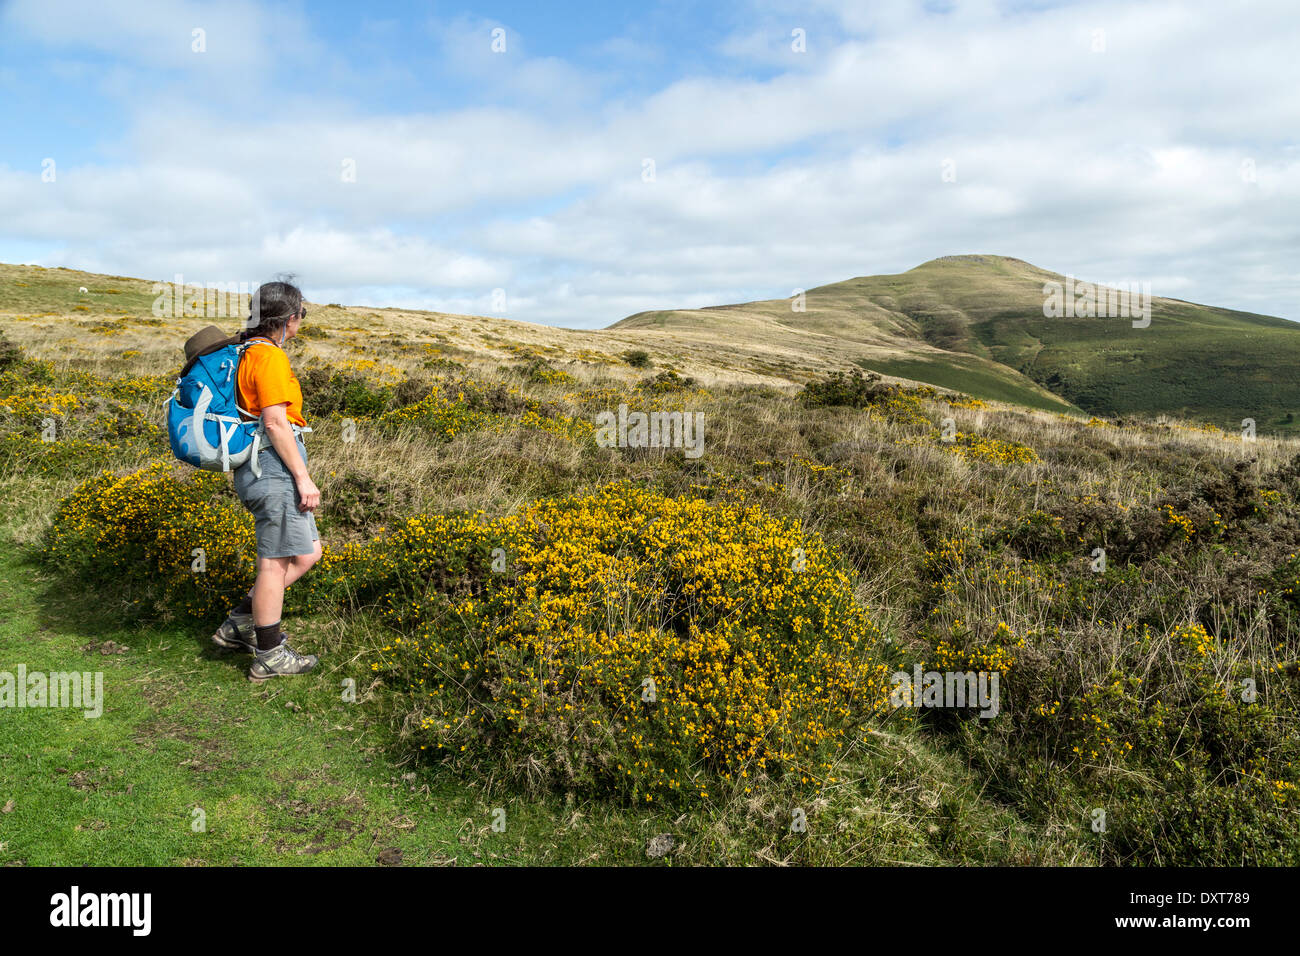 Walker approaching the Sugar Loaf mountain from the west, Abergavenny, Wales, UK Stock Photo